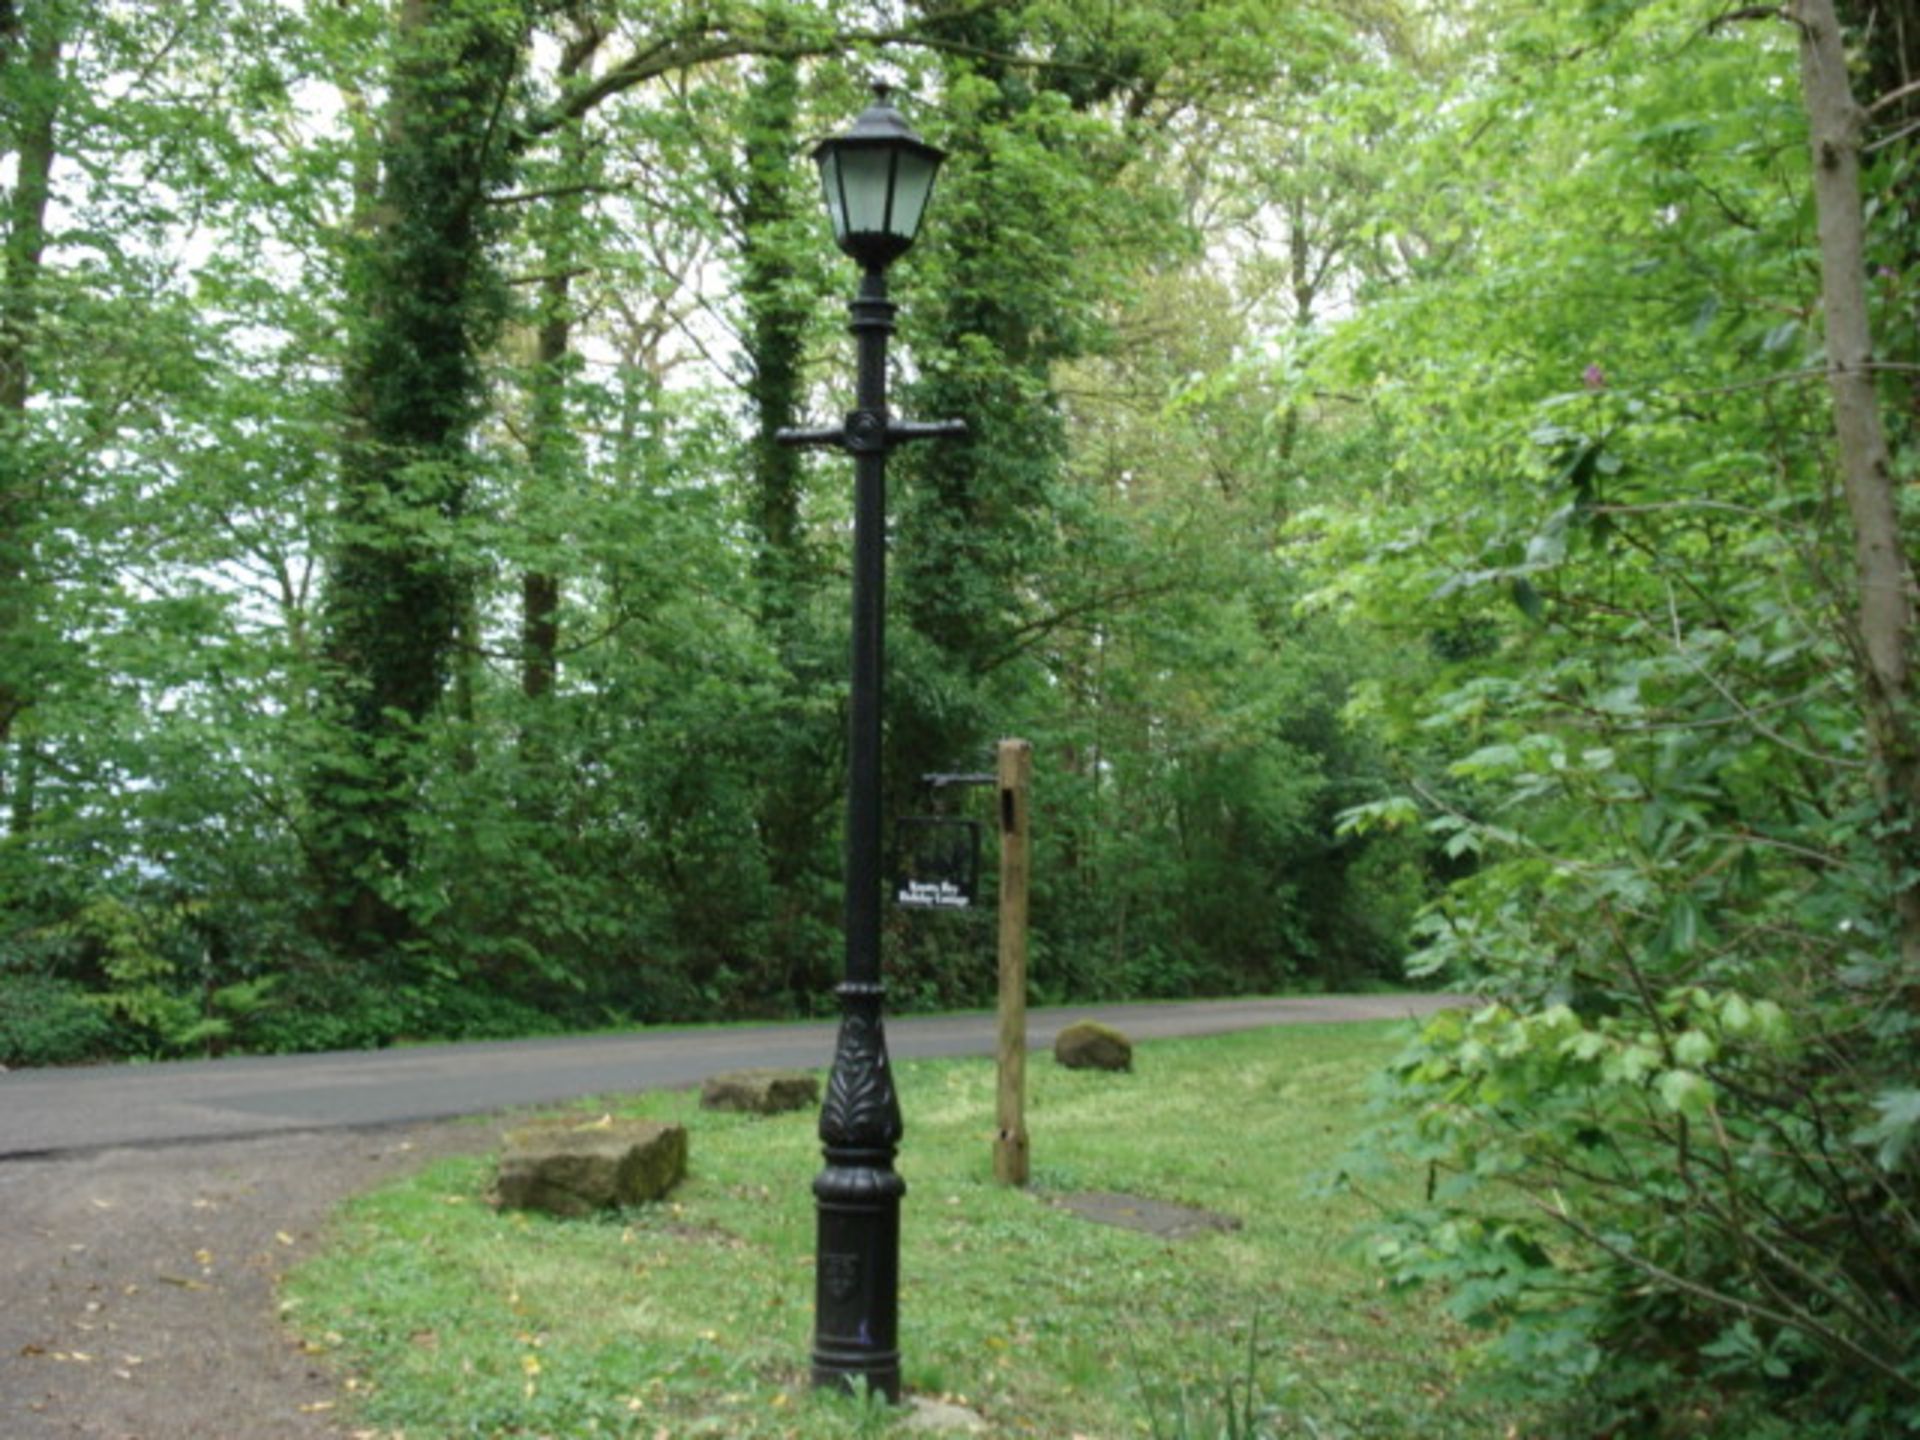 12FT TALL VICTORIAN STYLE HIGH QUALITY CAST IRON LAMPOST AND MATCHING GLAZED CAST IRON TOP - NEW